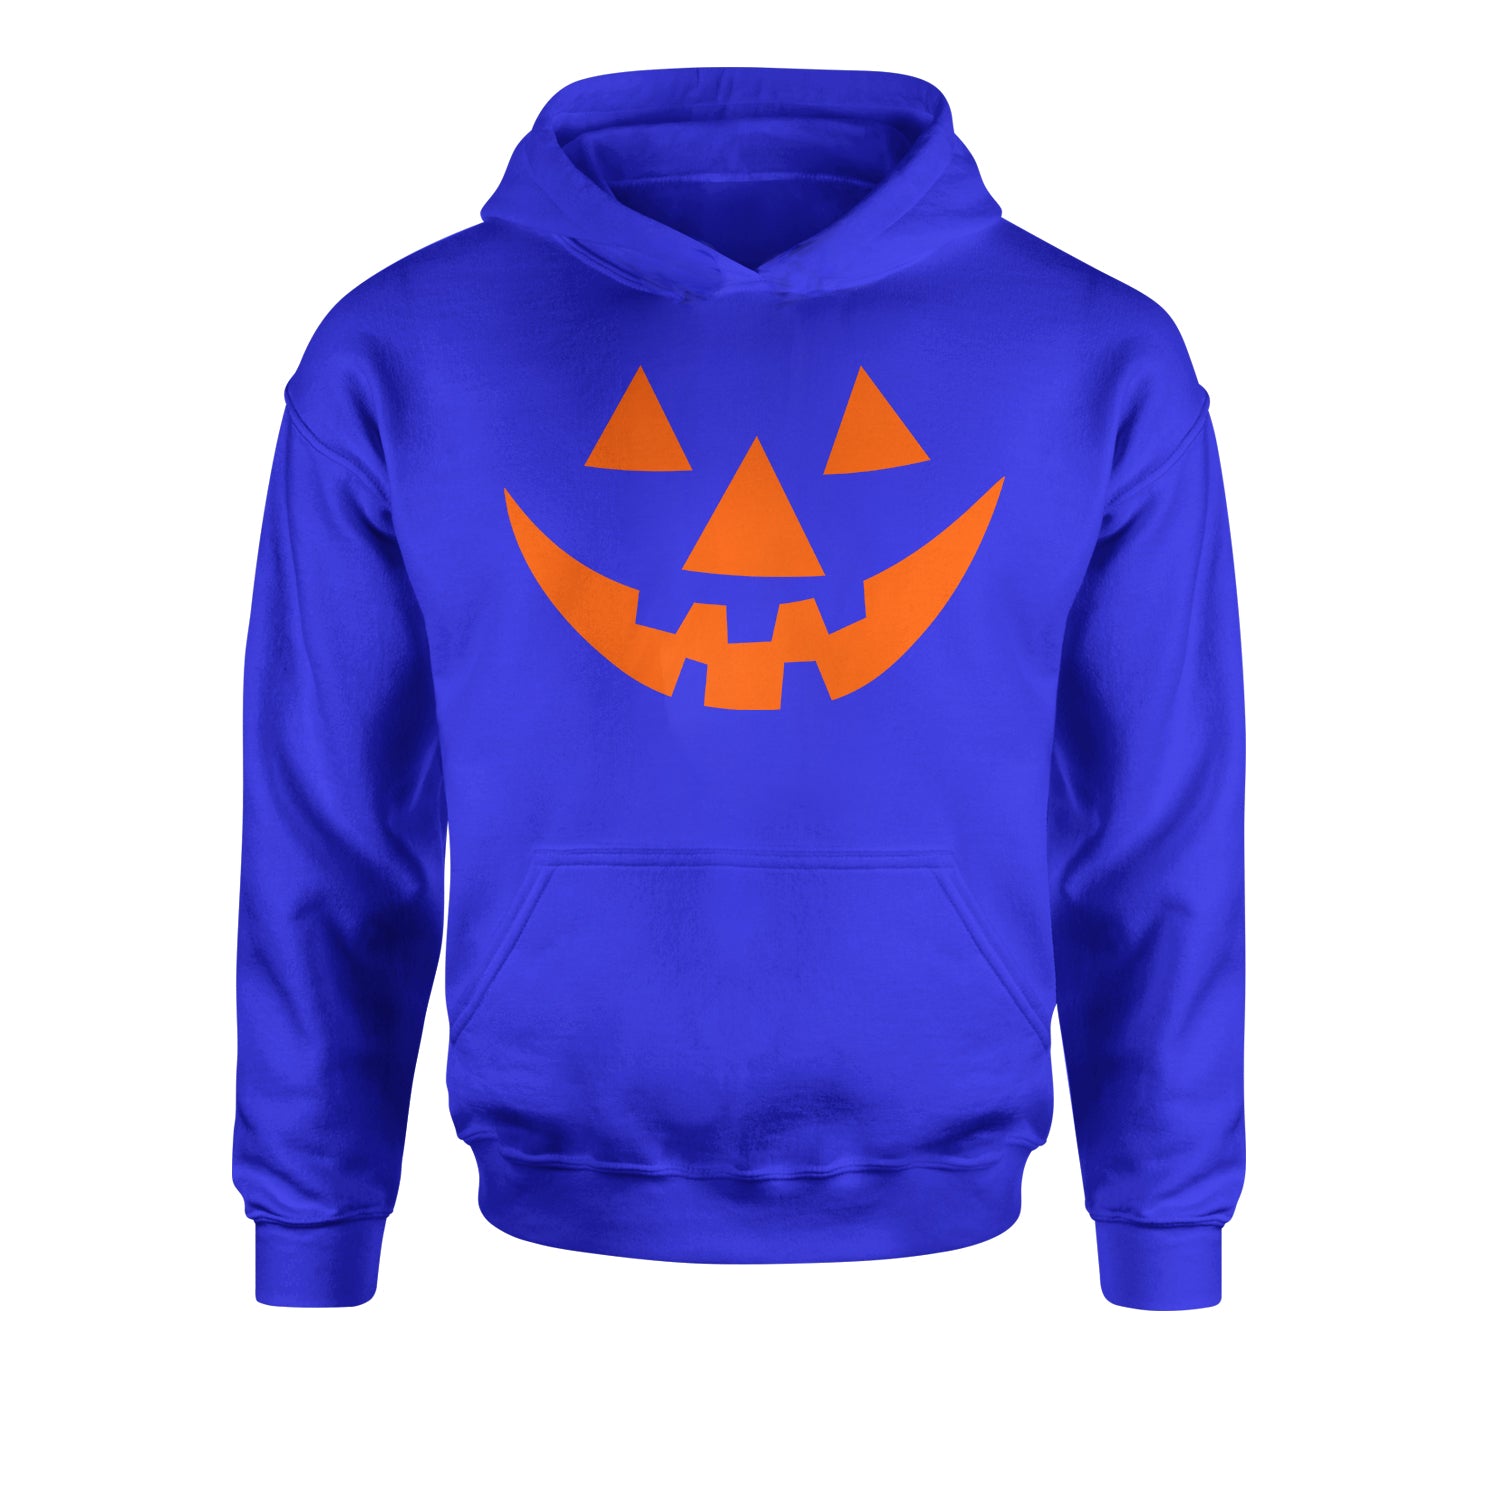 Pumpkin Face (Orange Print) Youth-Sized Hoodie costume, dress, dressup, eve, halloween, hallows, jackolantern, party, up by Expression Tees